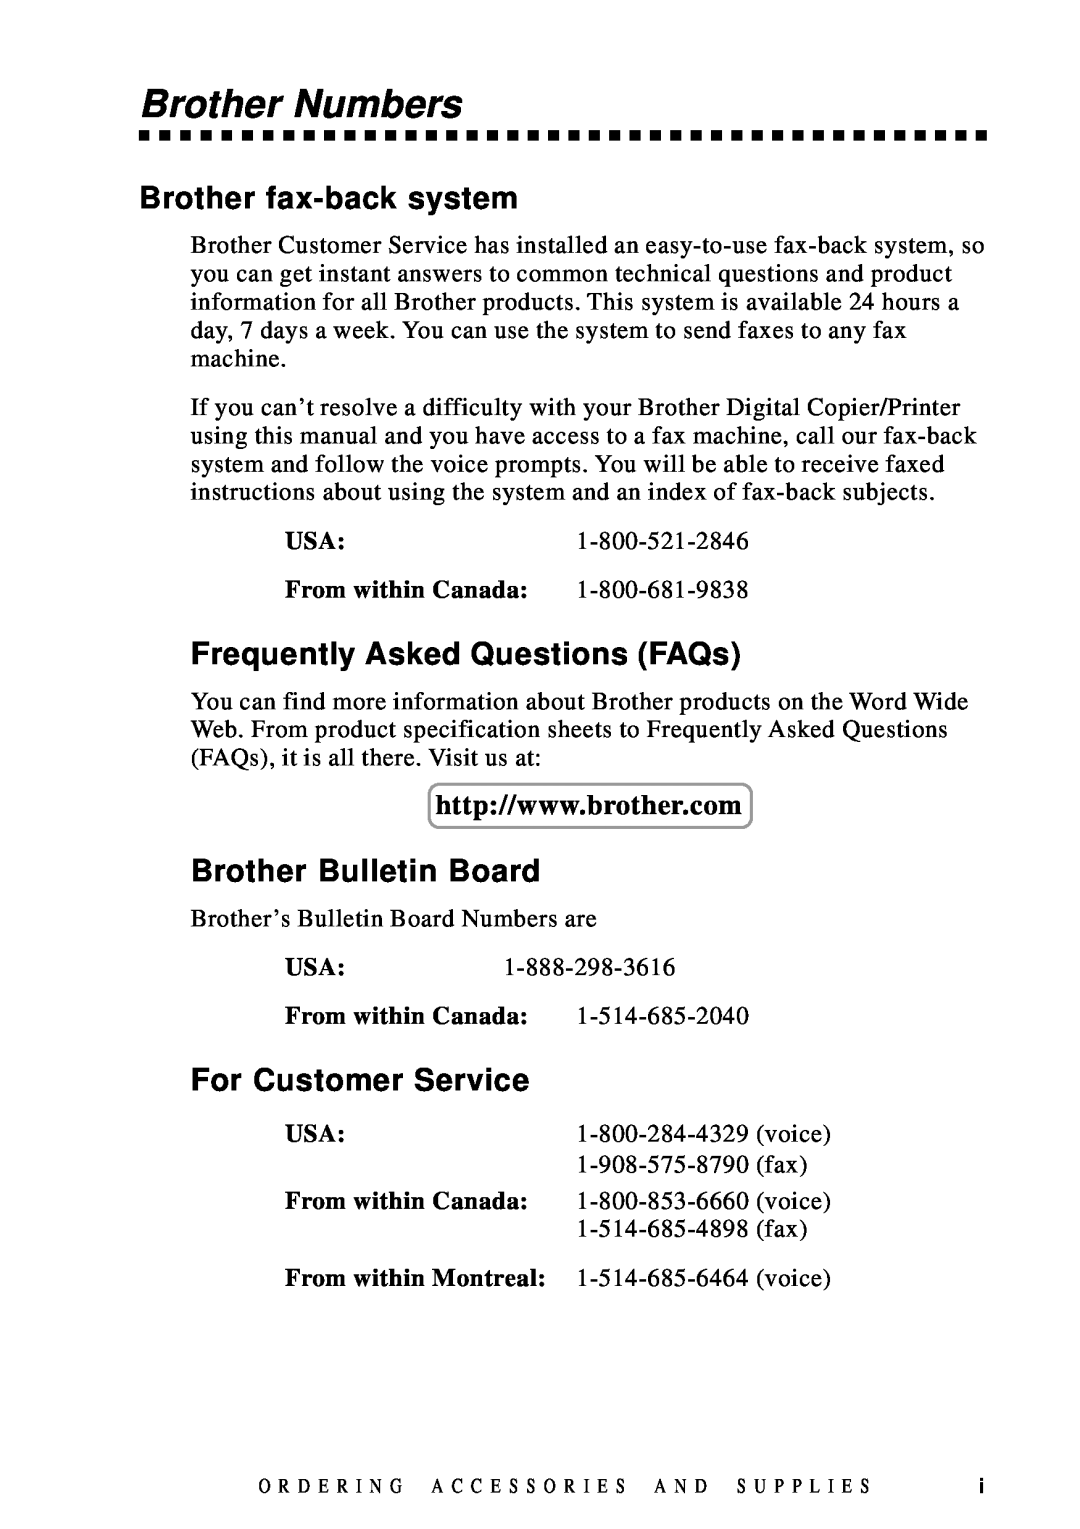 Brother DCP1200 manual Brother Numbers, Brother fax-back system, Frequently Asked Questions FAQs, Brother Bulletin Board 